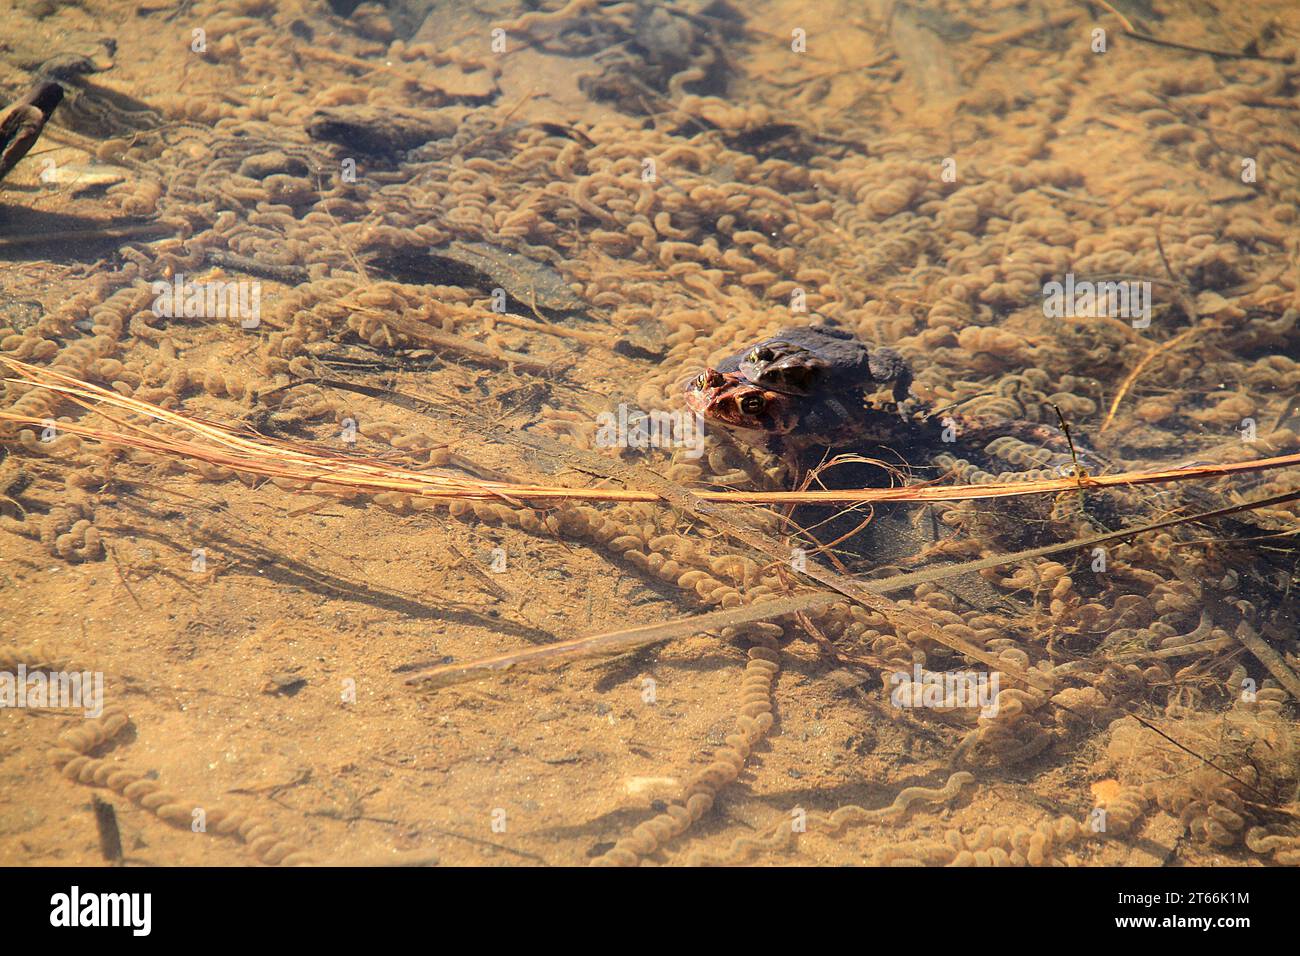 Brown frogs mating at the edge of a pond in Virginia, USA. Just laid eggs, fertilized by the male as the female lays them, are seen around them. Stock Photo